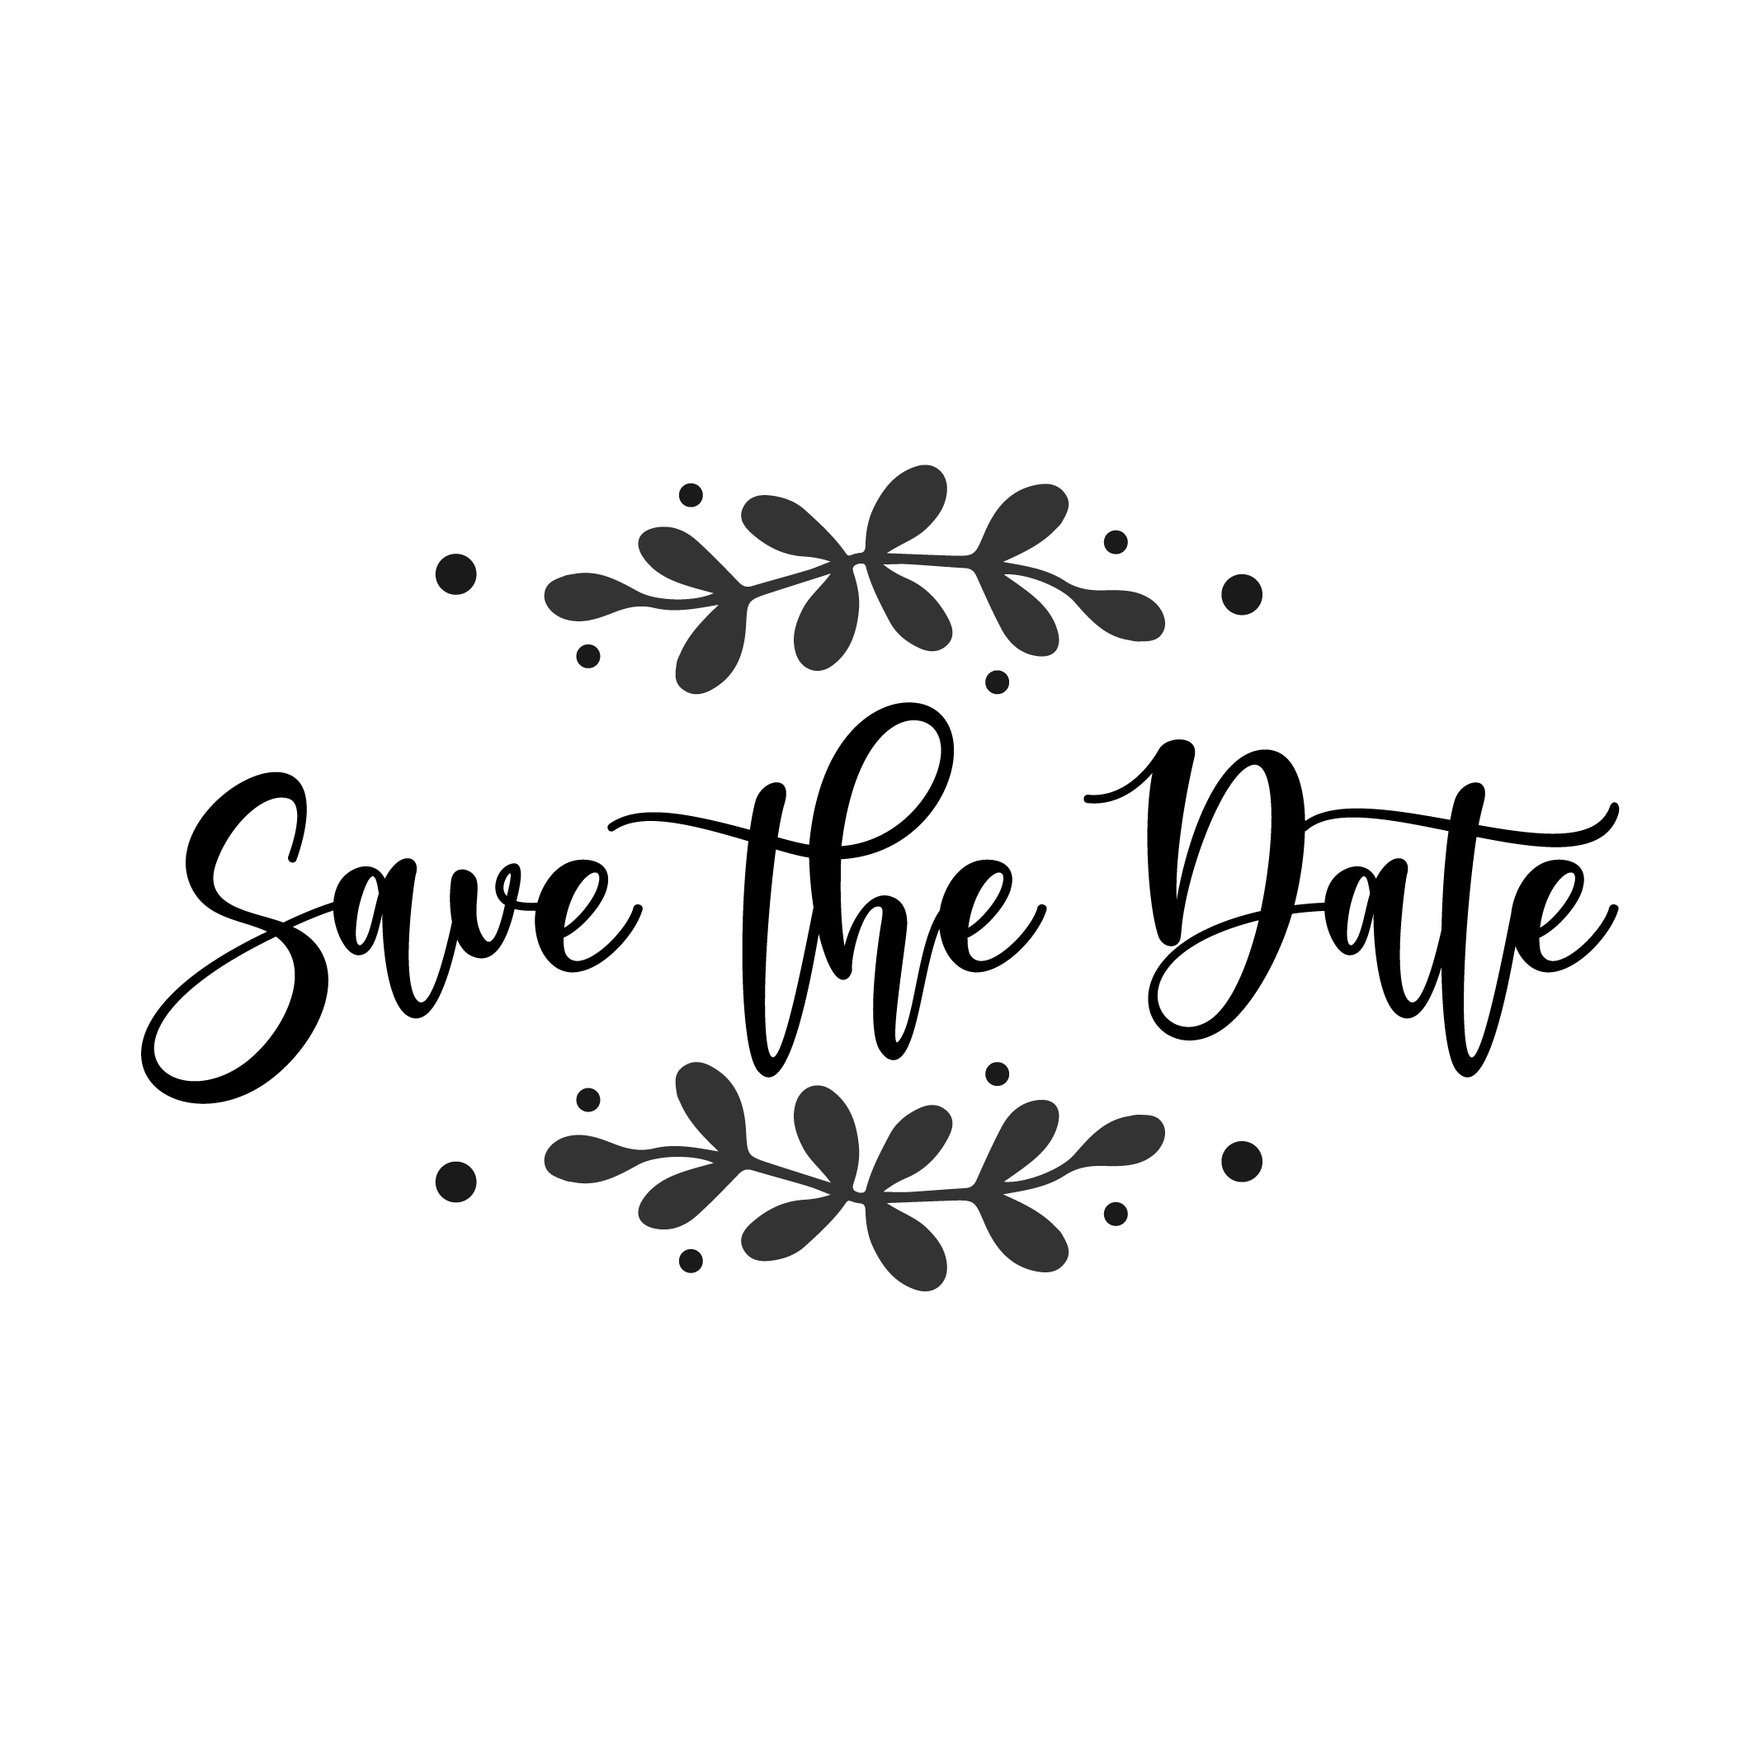 Save The Date Silhouette in Illustrator, EPS, SVG, JPG, PNG